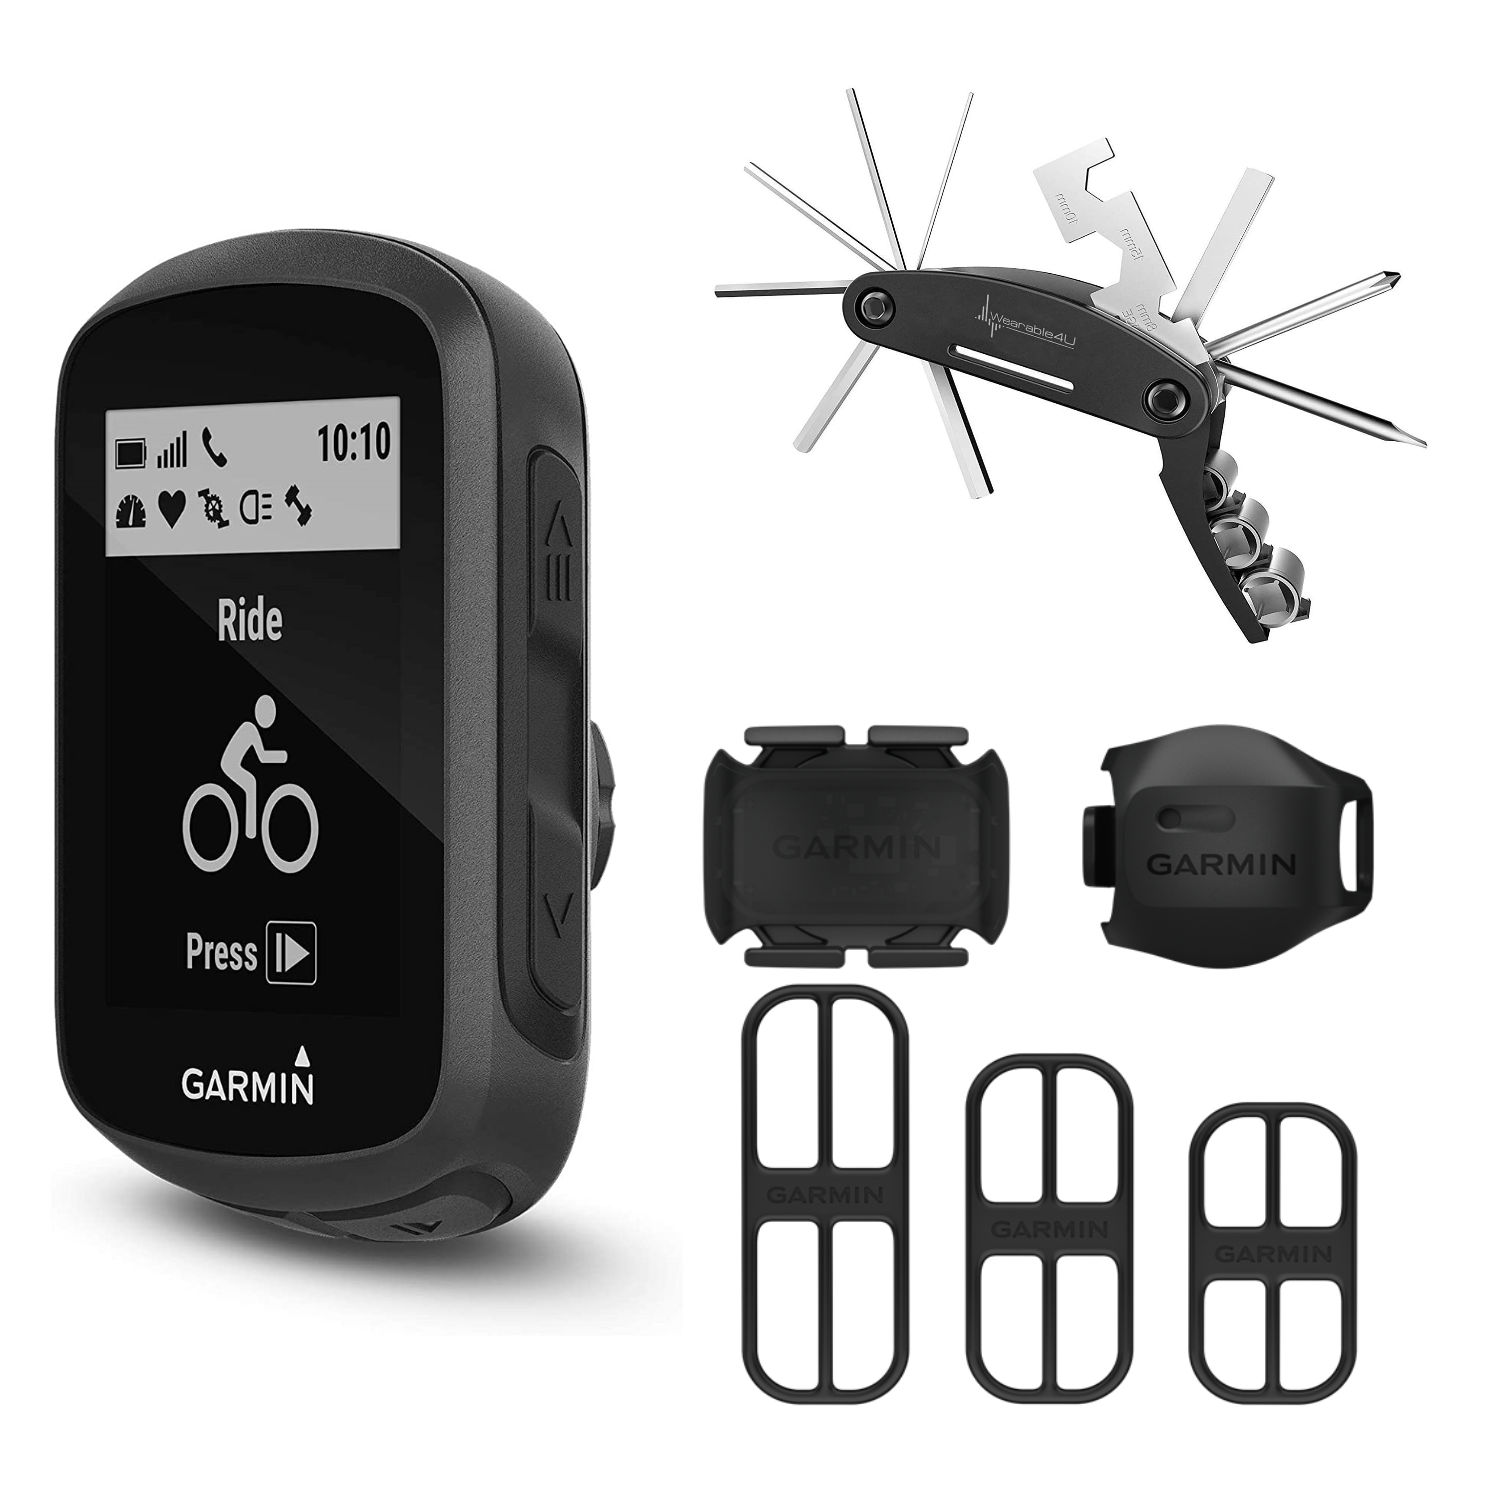 Plus Sp included Gadgets and Garmin Edge 130 Sports Cycling with Garmin – GPS Computer Bike